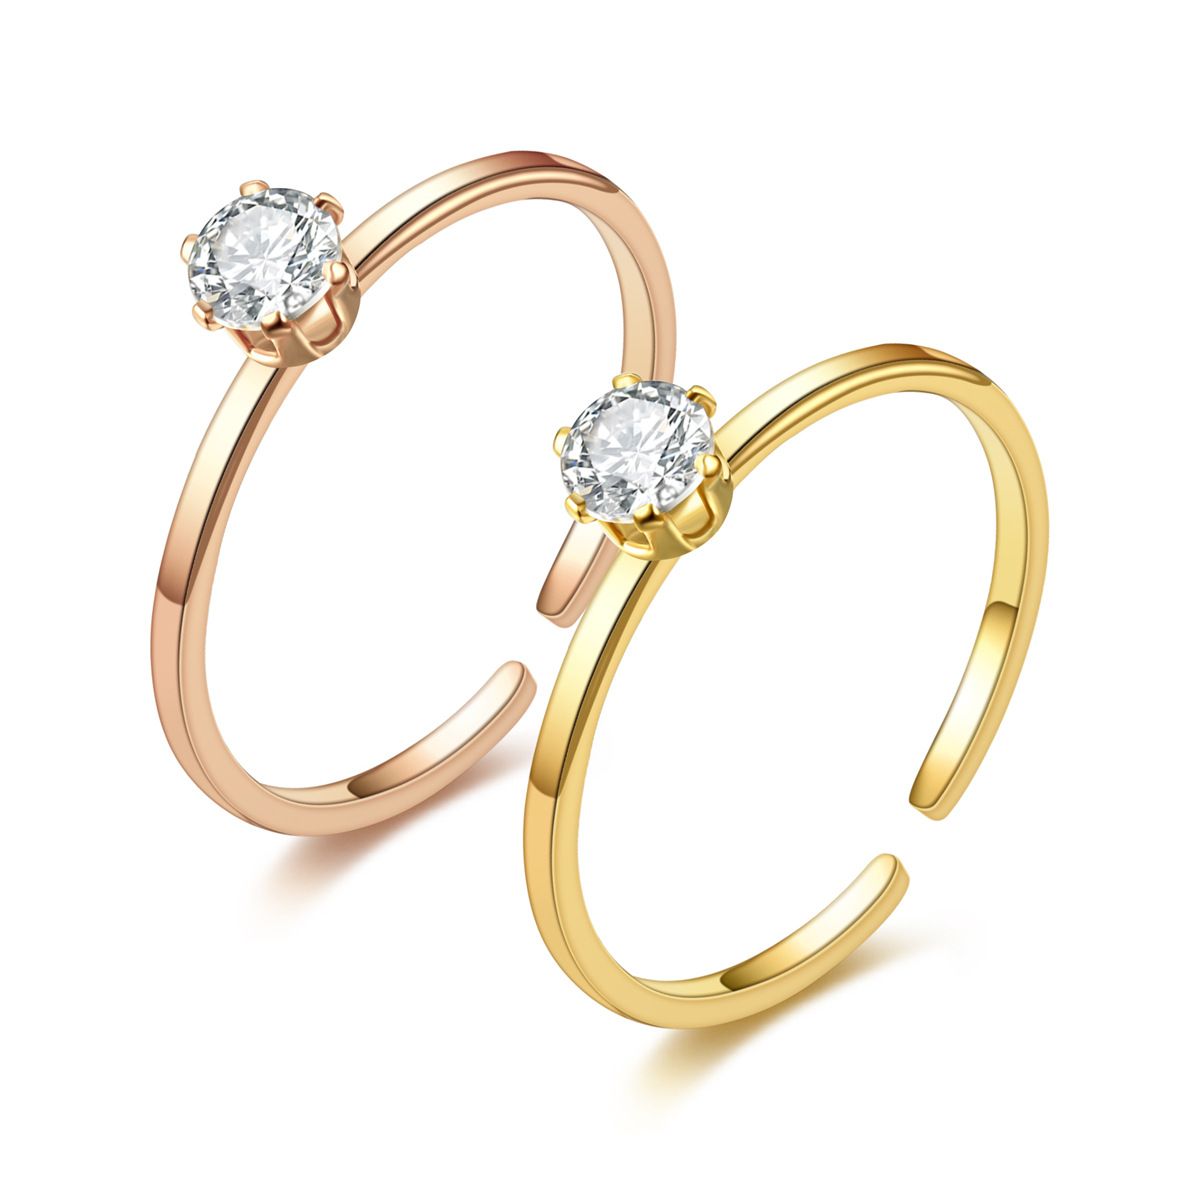 https://m.clubbella.co/product/molten-rose-gold-solitary-ring/ Molten Gold minimal zircon ring (4)